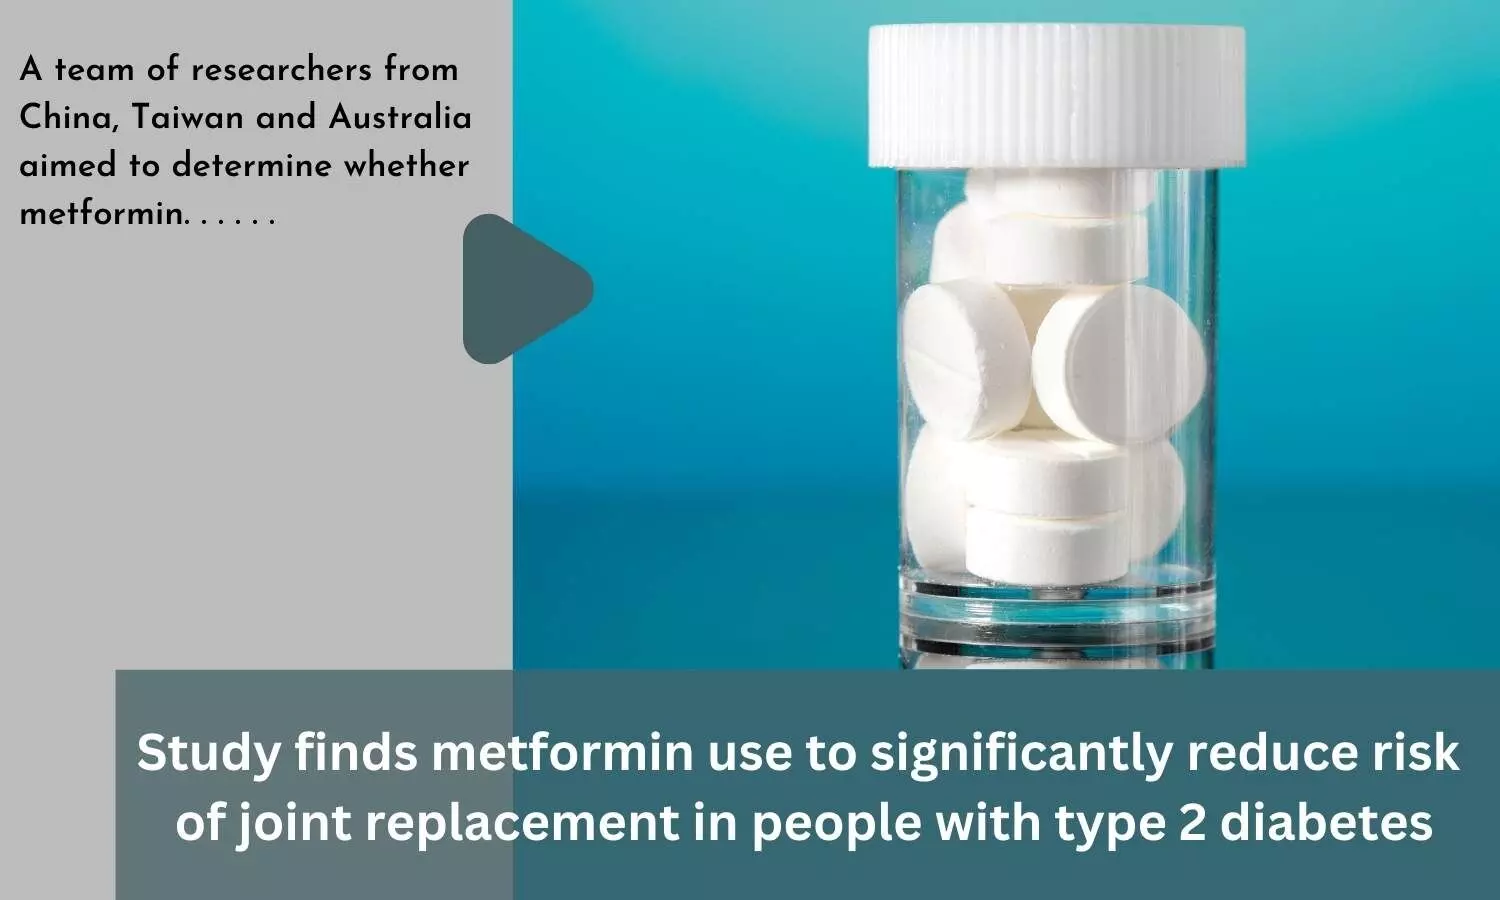 Study finds metformin use to significantly reduce risk of joint replacement in people with type 2 diabetes